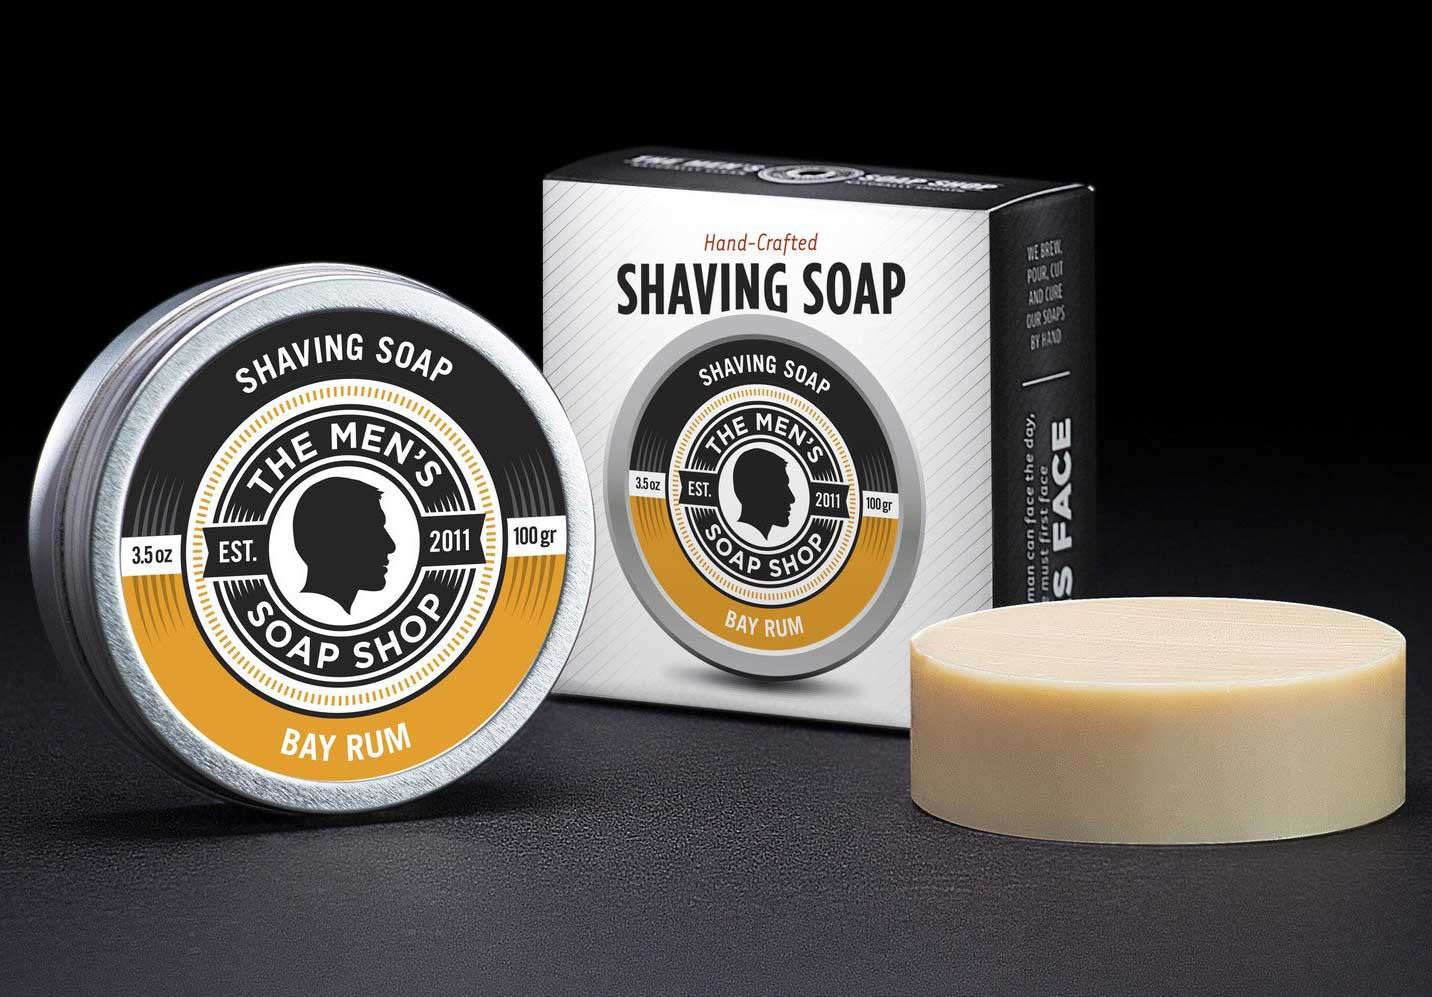 Bay Rum Shaving Soap, Large Size. The Men's Soap Shop – Well Done Goods, by  Cyberoptix